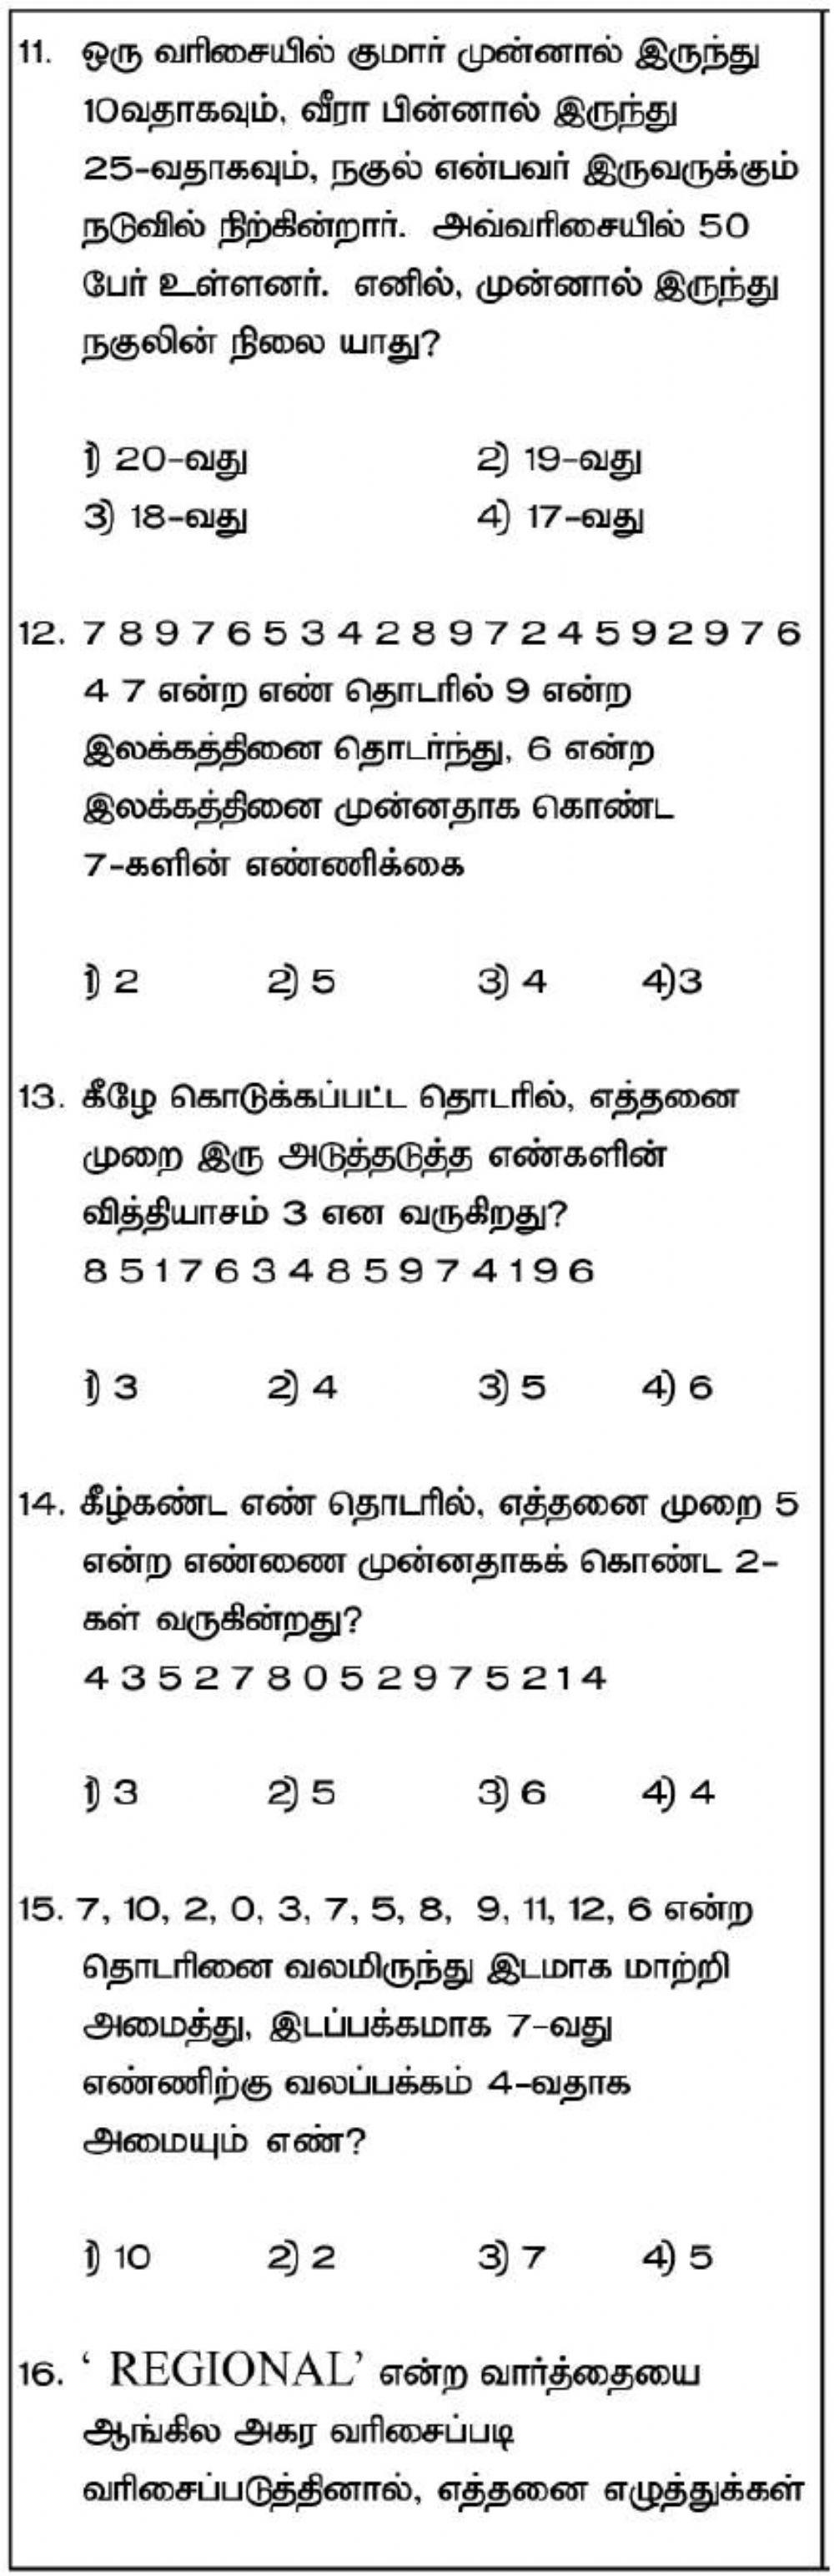 Nmms-Mat-RANKING TEST and NUMBER- LETTER TEST